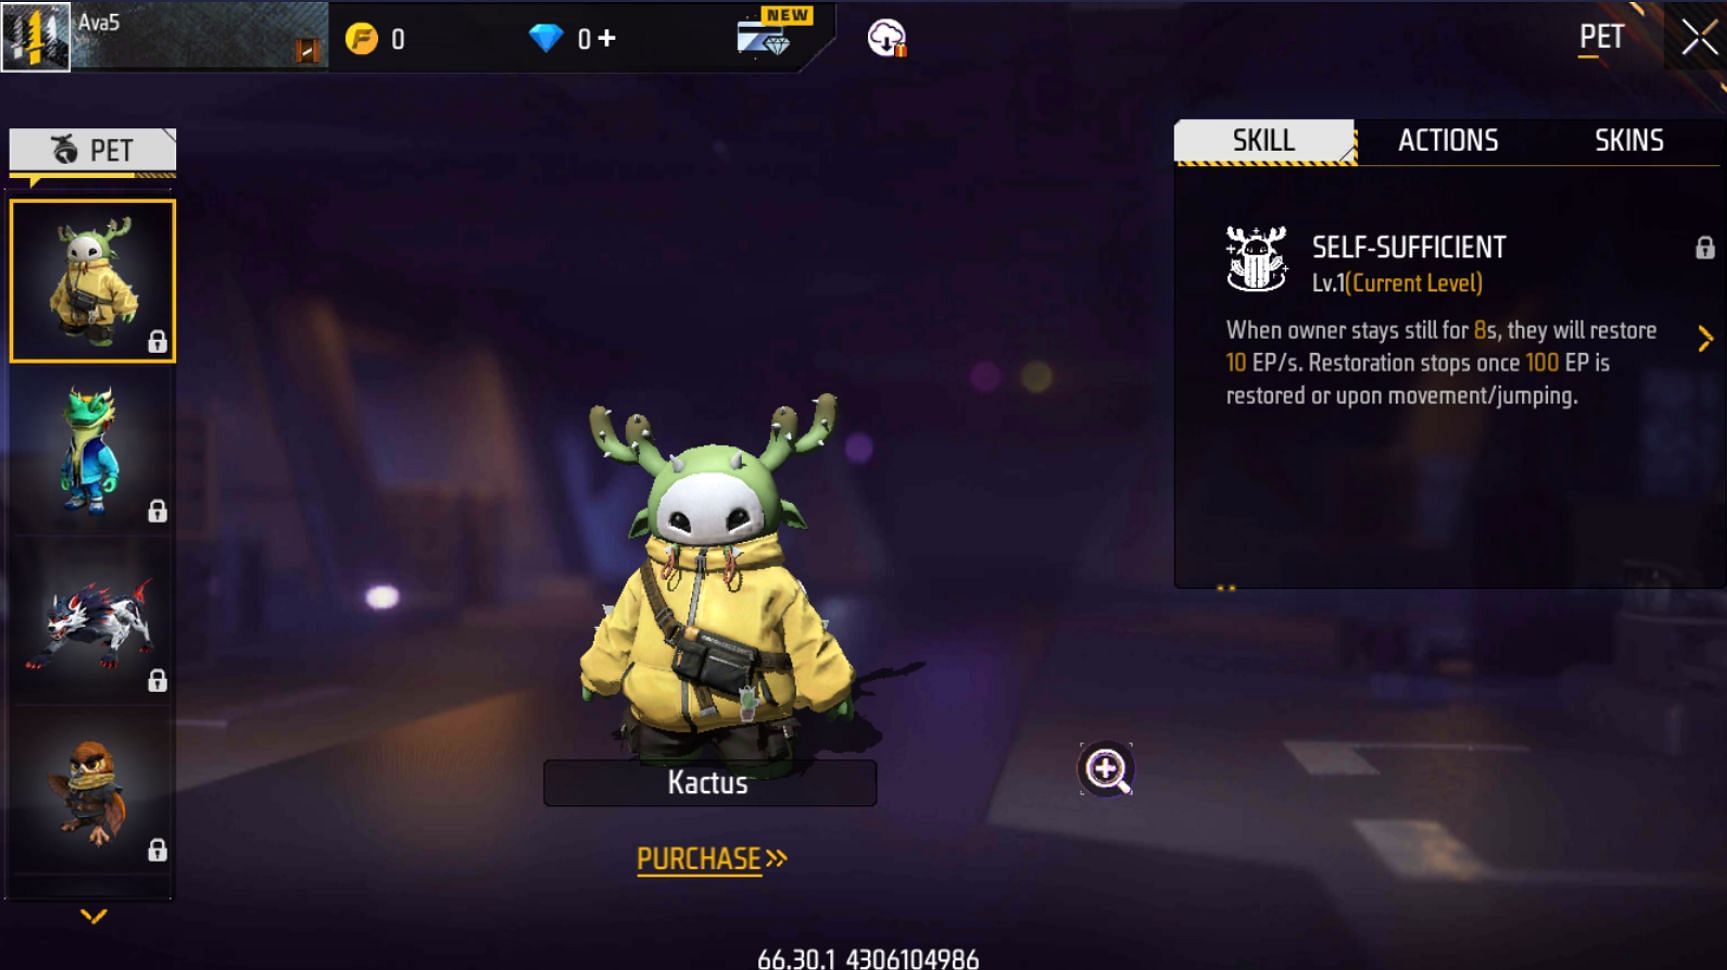 Kactus is the name of the newest pet addition in Free Fire Advance Server (Image via Garena)